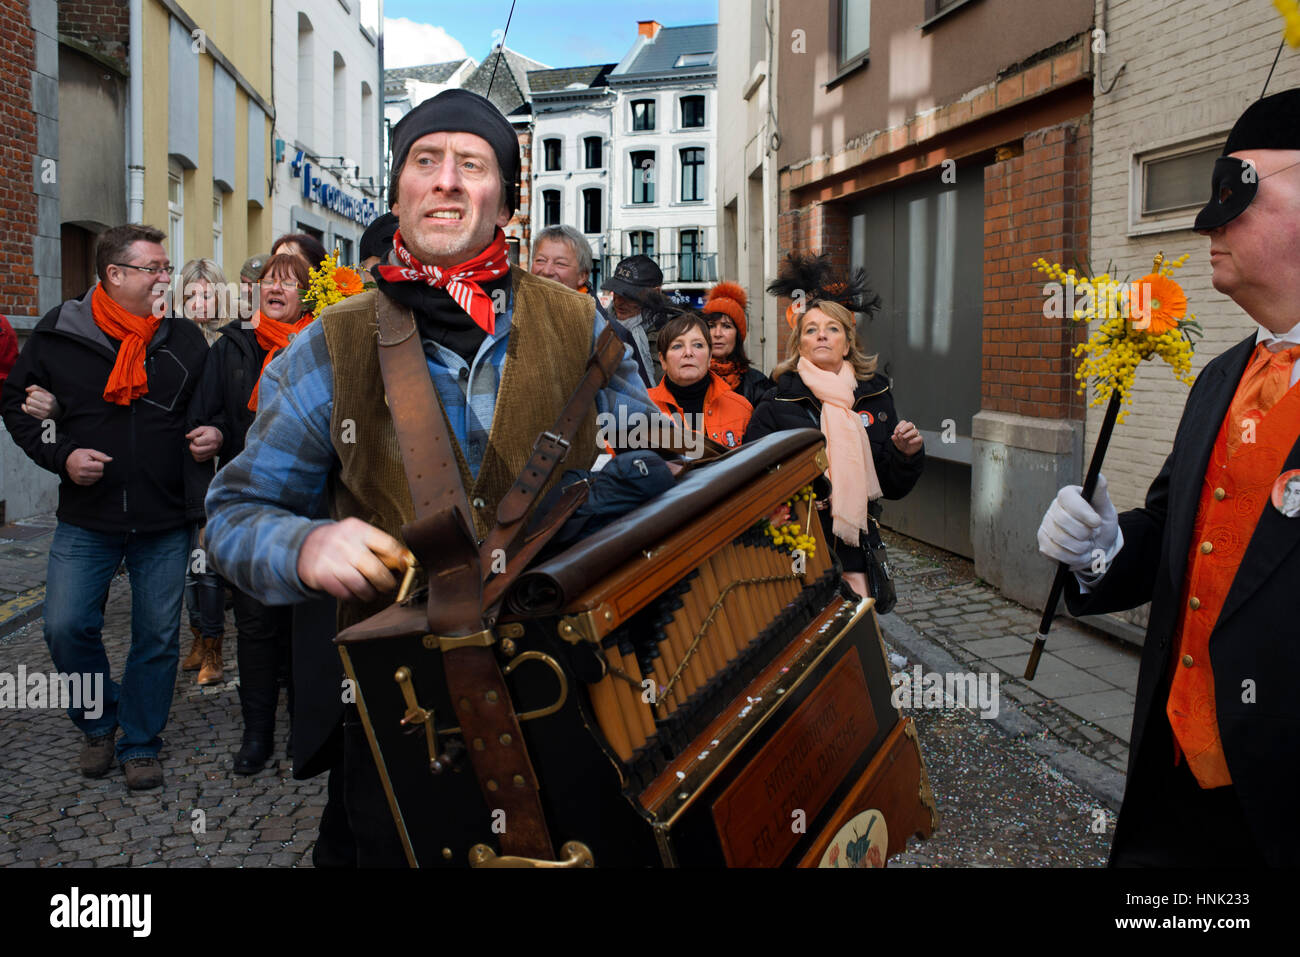 Music, dance, party and costumes in Binche Carnival. Ancient and representative cultural event of Wallonia, Belgium. Stock Photo